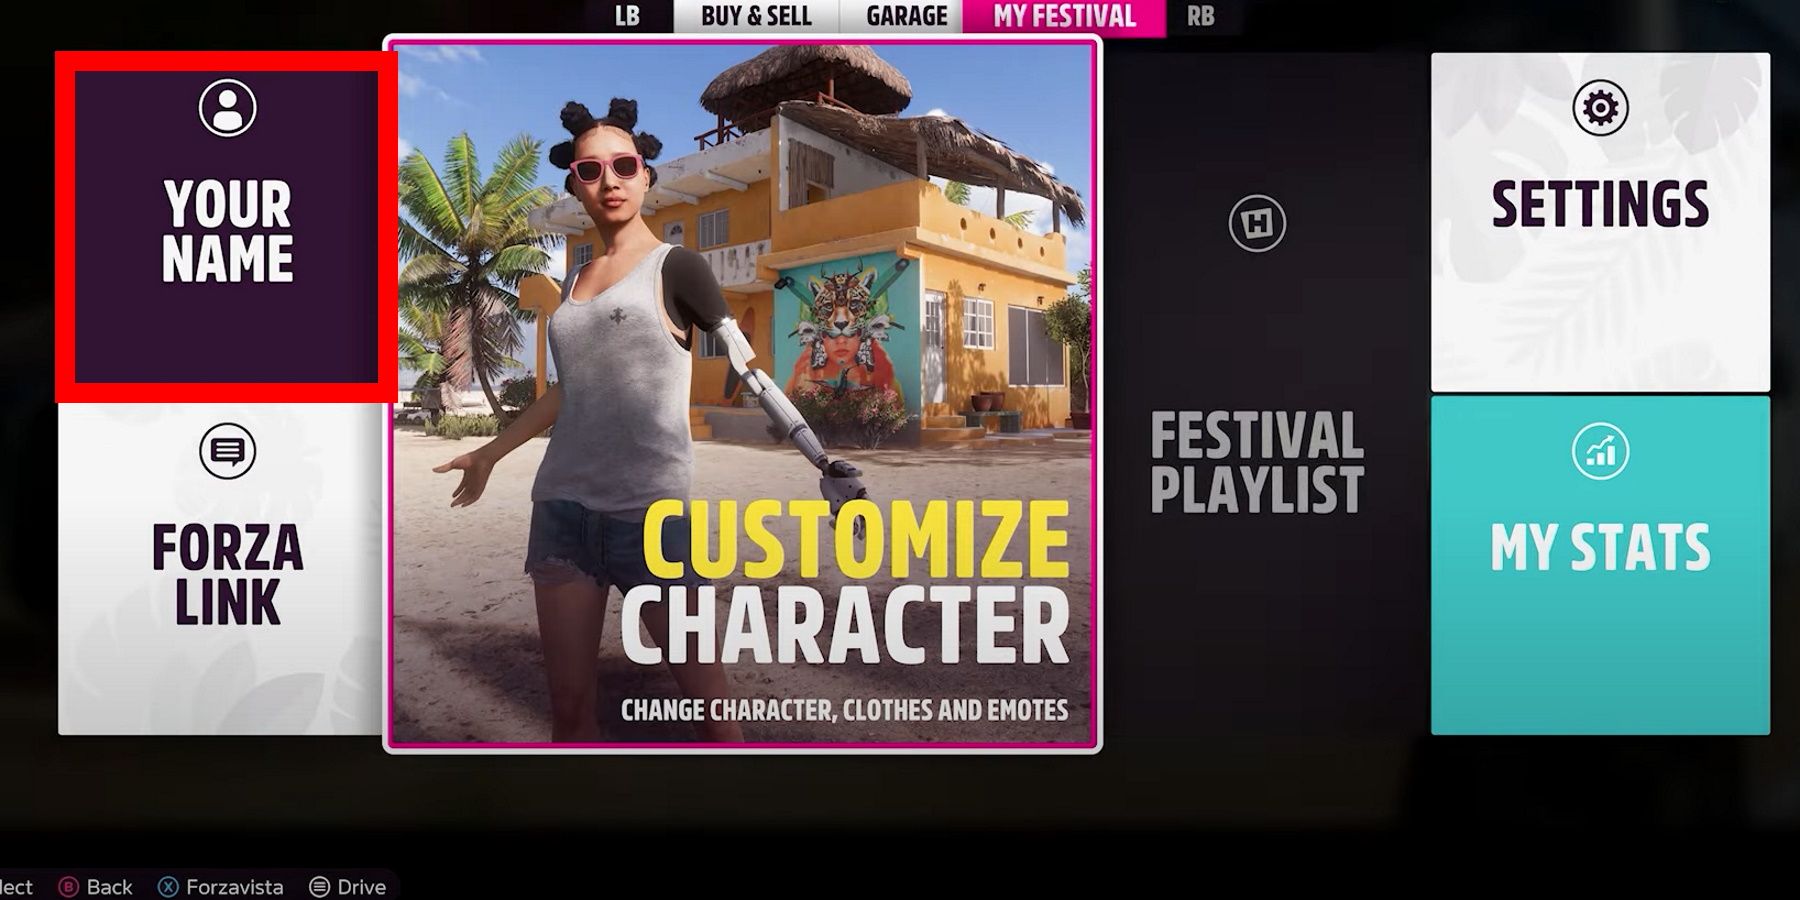 Forza Horizon 5 my festival menu tab with "your name" highlighted